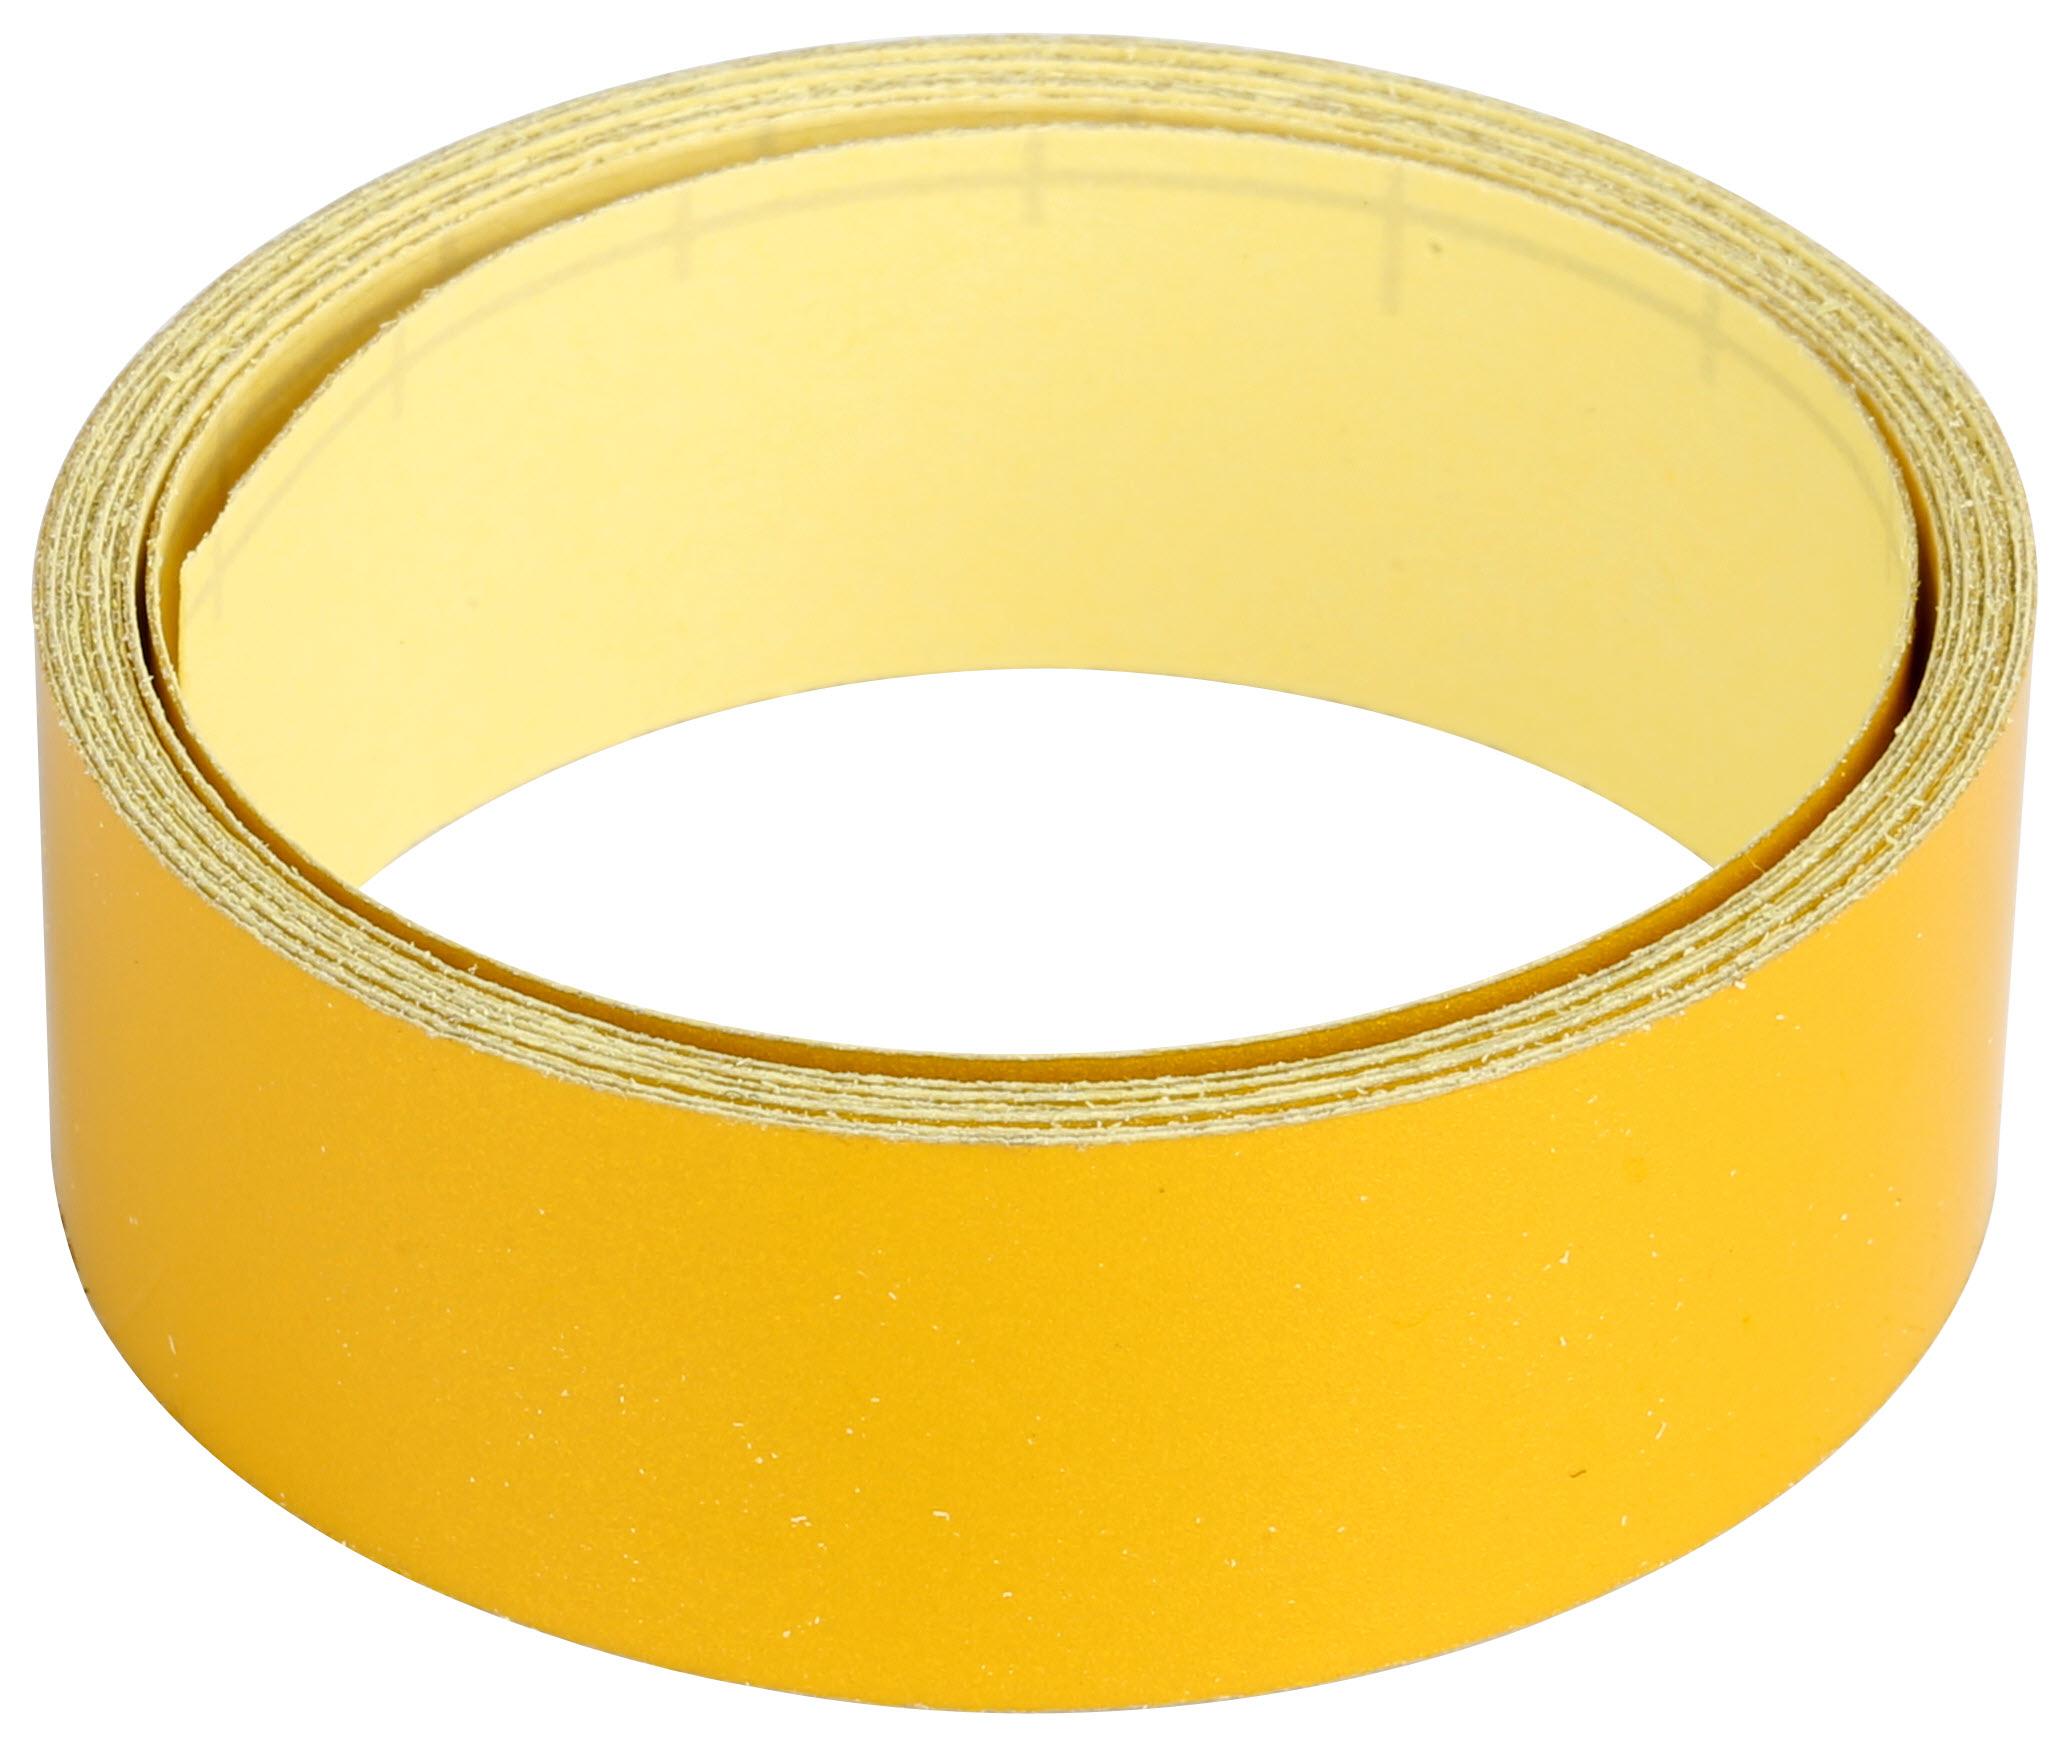 Summit Safety Reflective Tape 1530Mm X 19Mm - Yellow